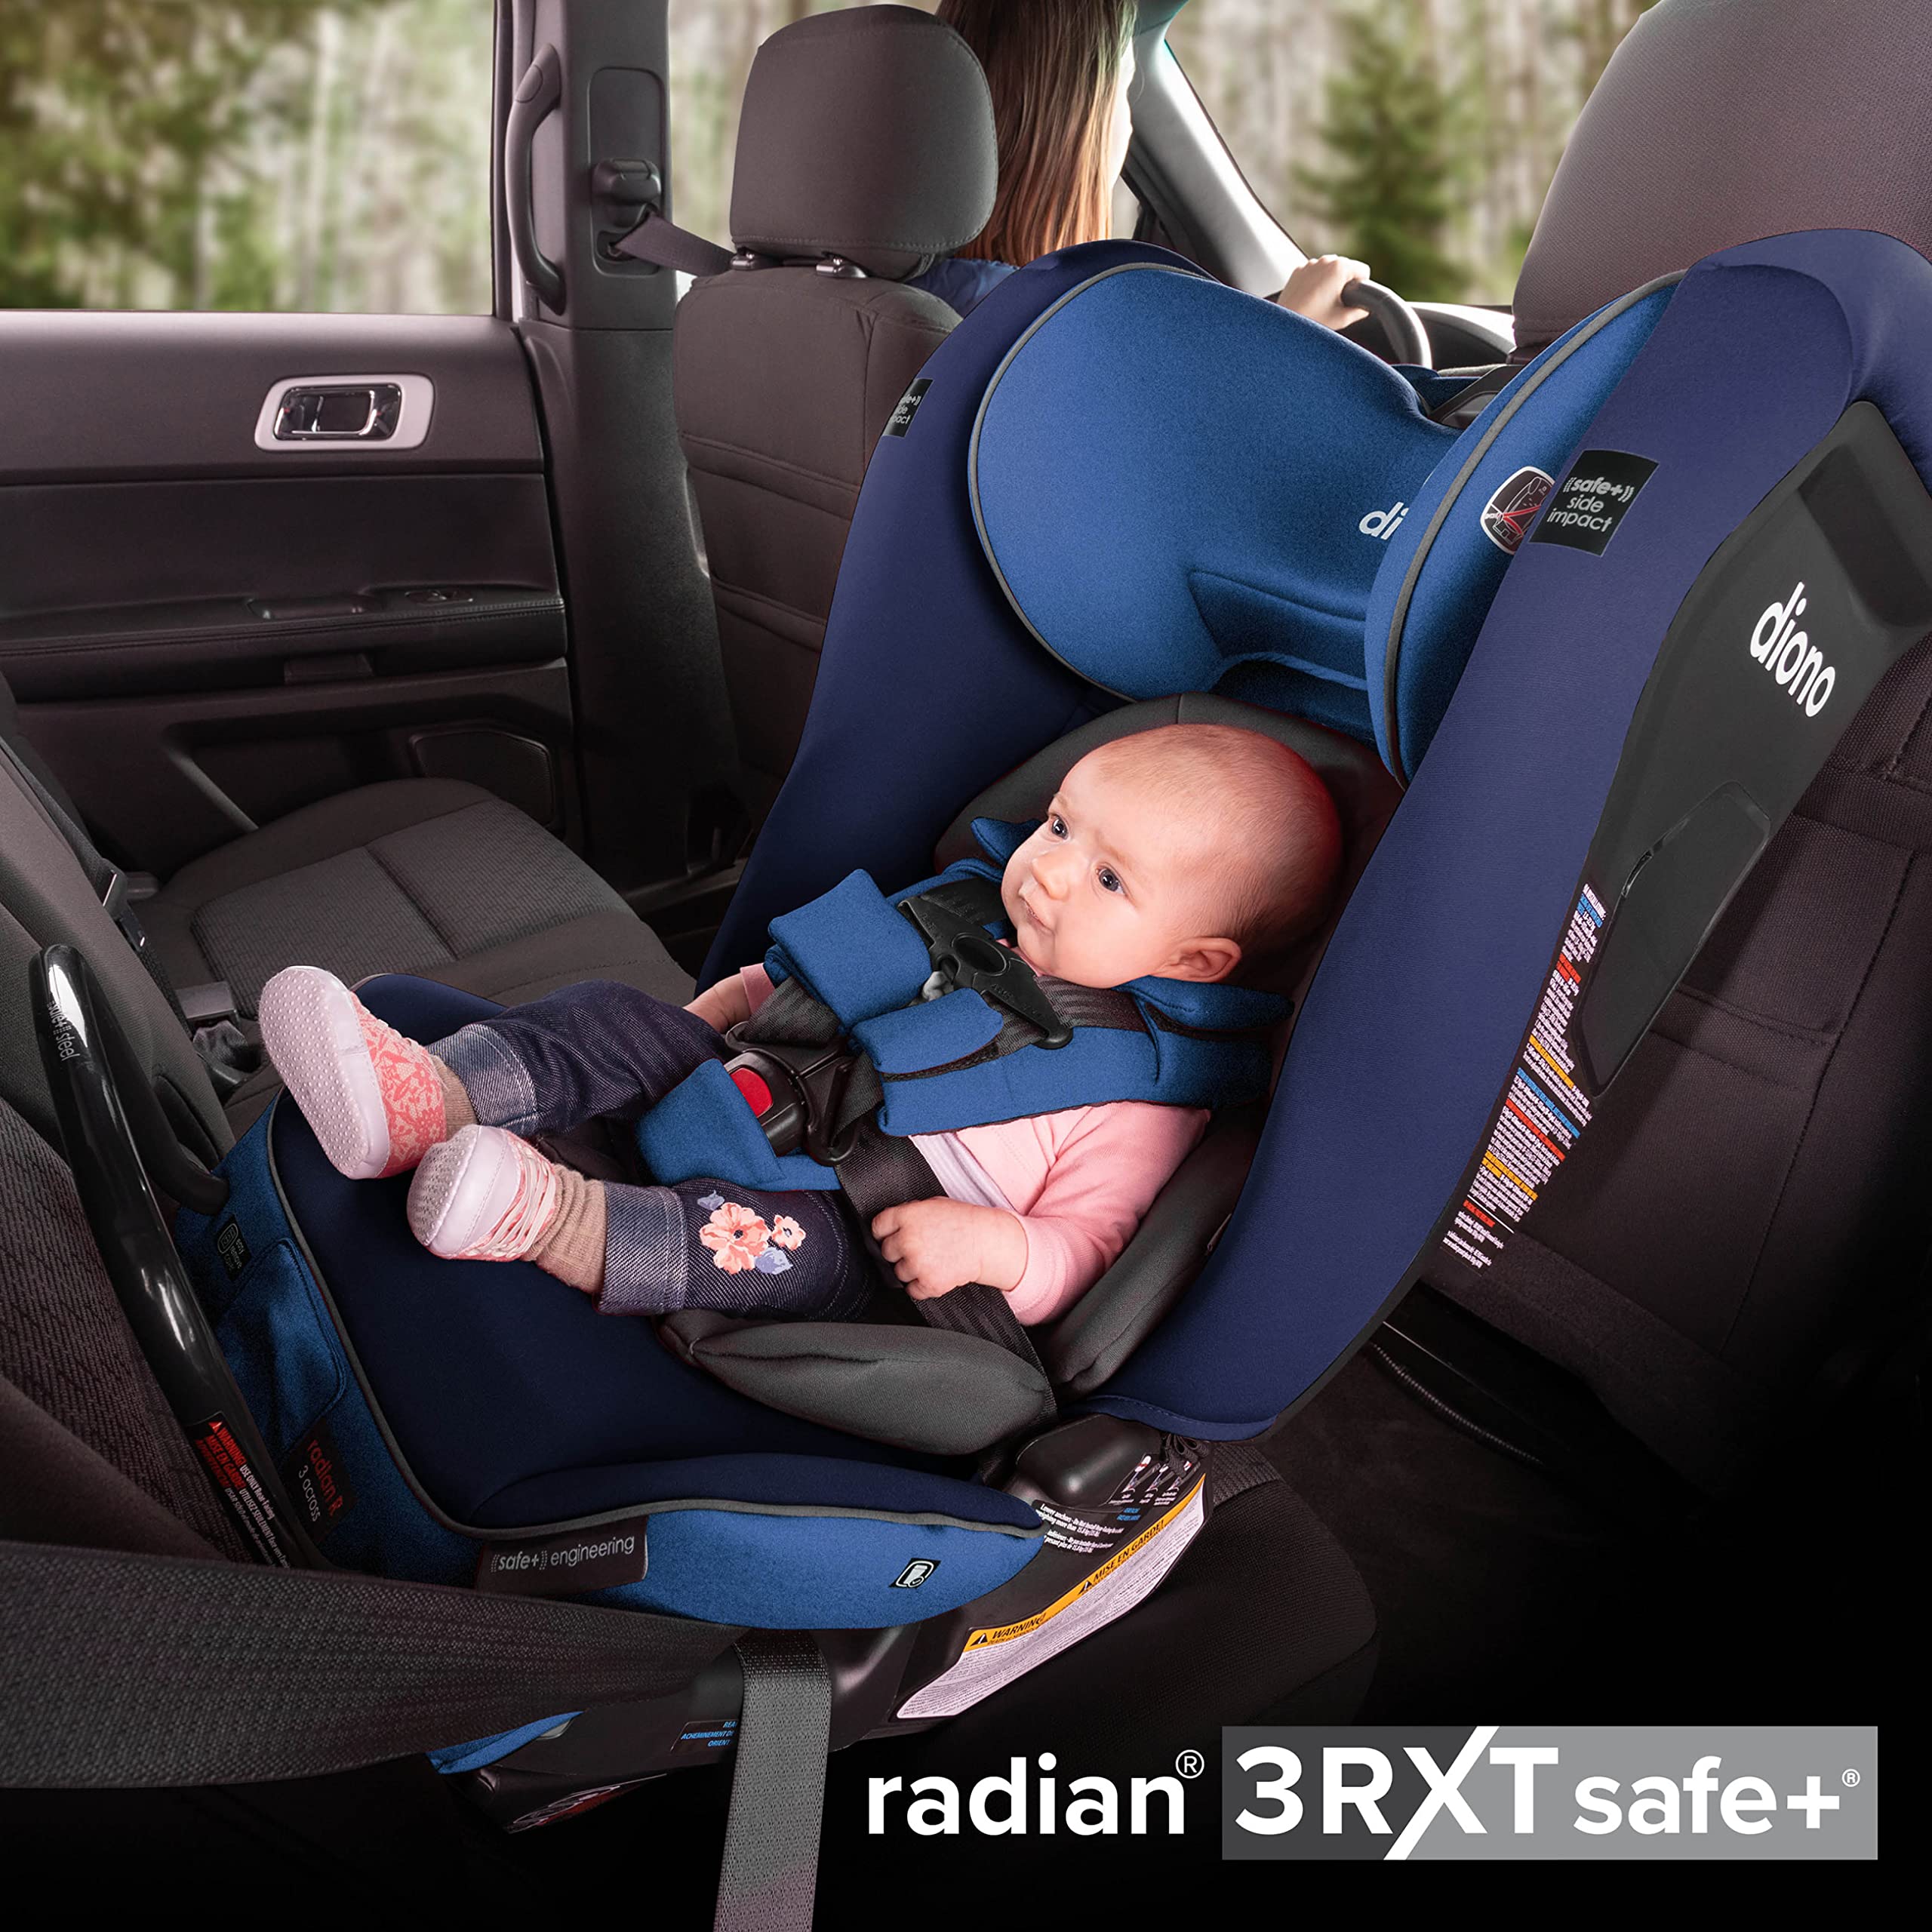 Diono Radian 3RXT SafePlus, 4-in-1 Convertible Car Seat, Rear and Forward Facing, SafePlus Engineering, 3 Stage -Infant Protection, 10 Years 1 Car Seat, Slim Fit 3 Across, Blue Sky